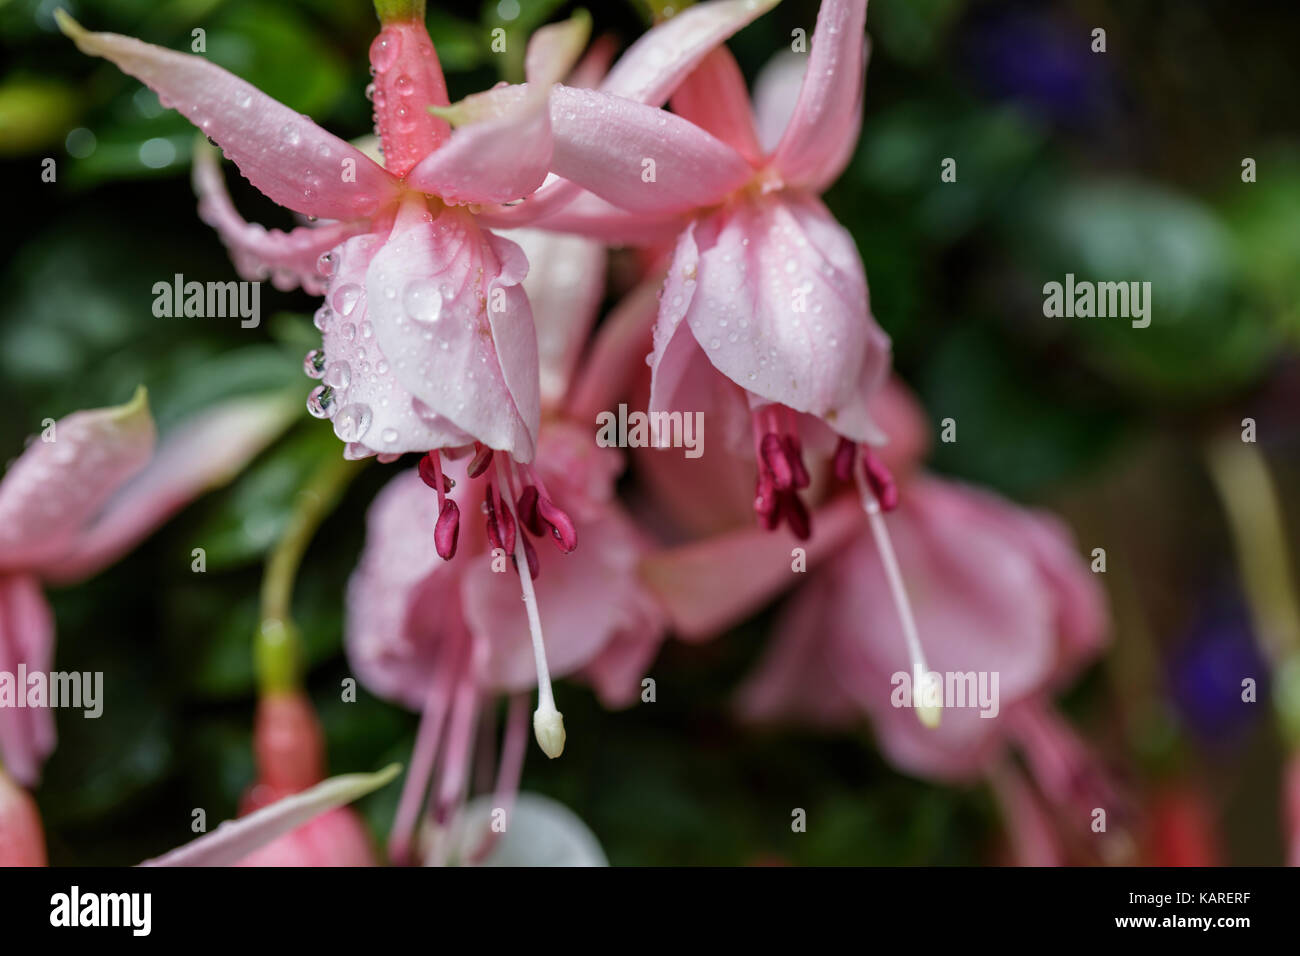 Close up of two fuchsia flowers Stock Photo